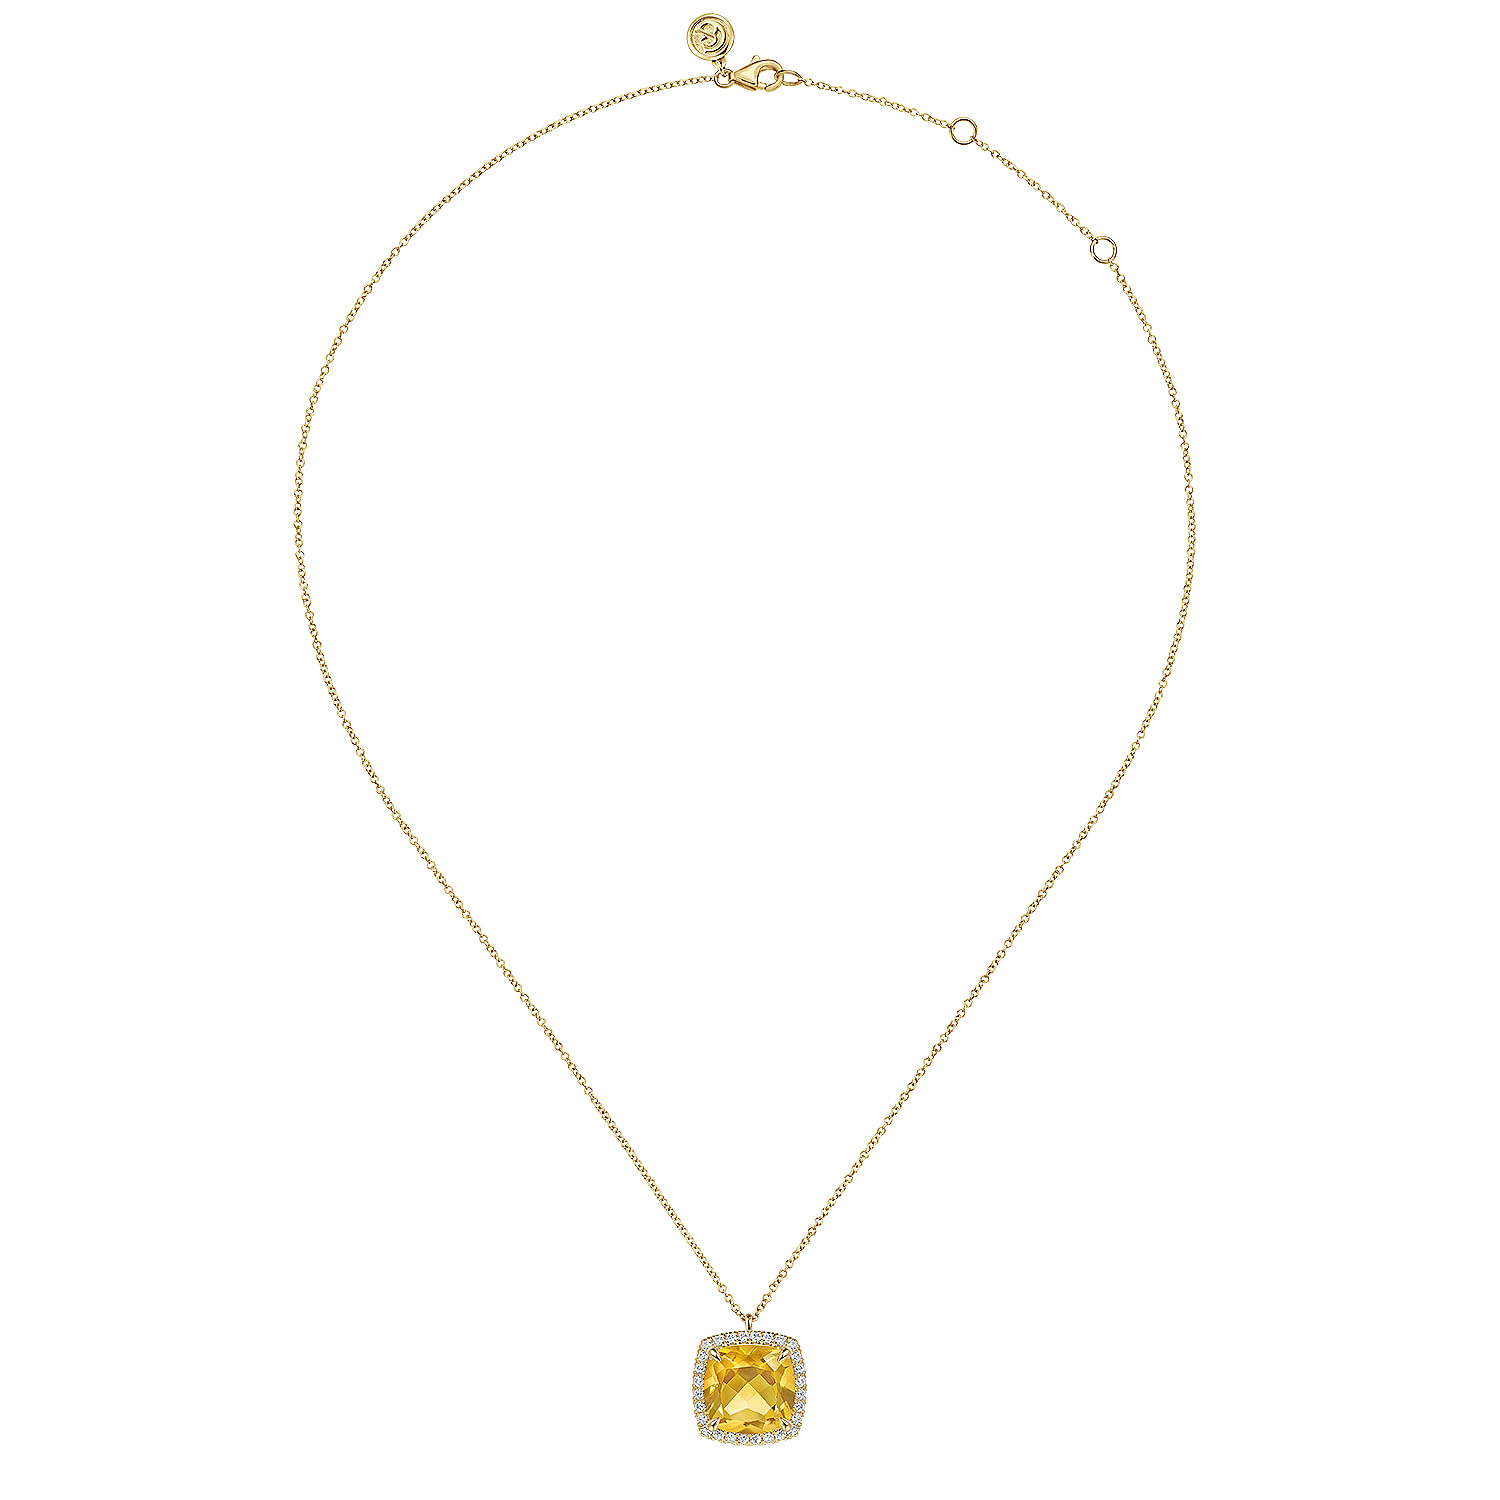 14K Yellow Gold Diamond and Citrine Cushion Cut Necklace With Flower Pattern J-Back